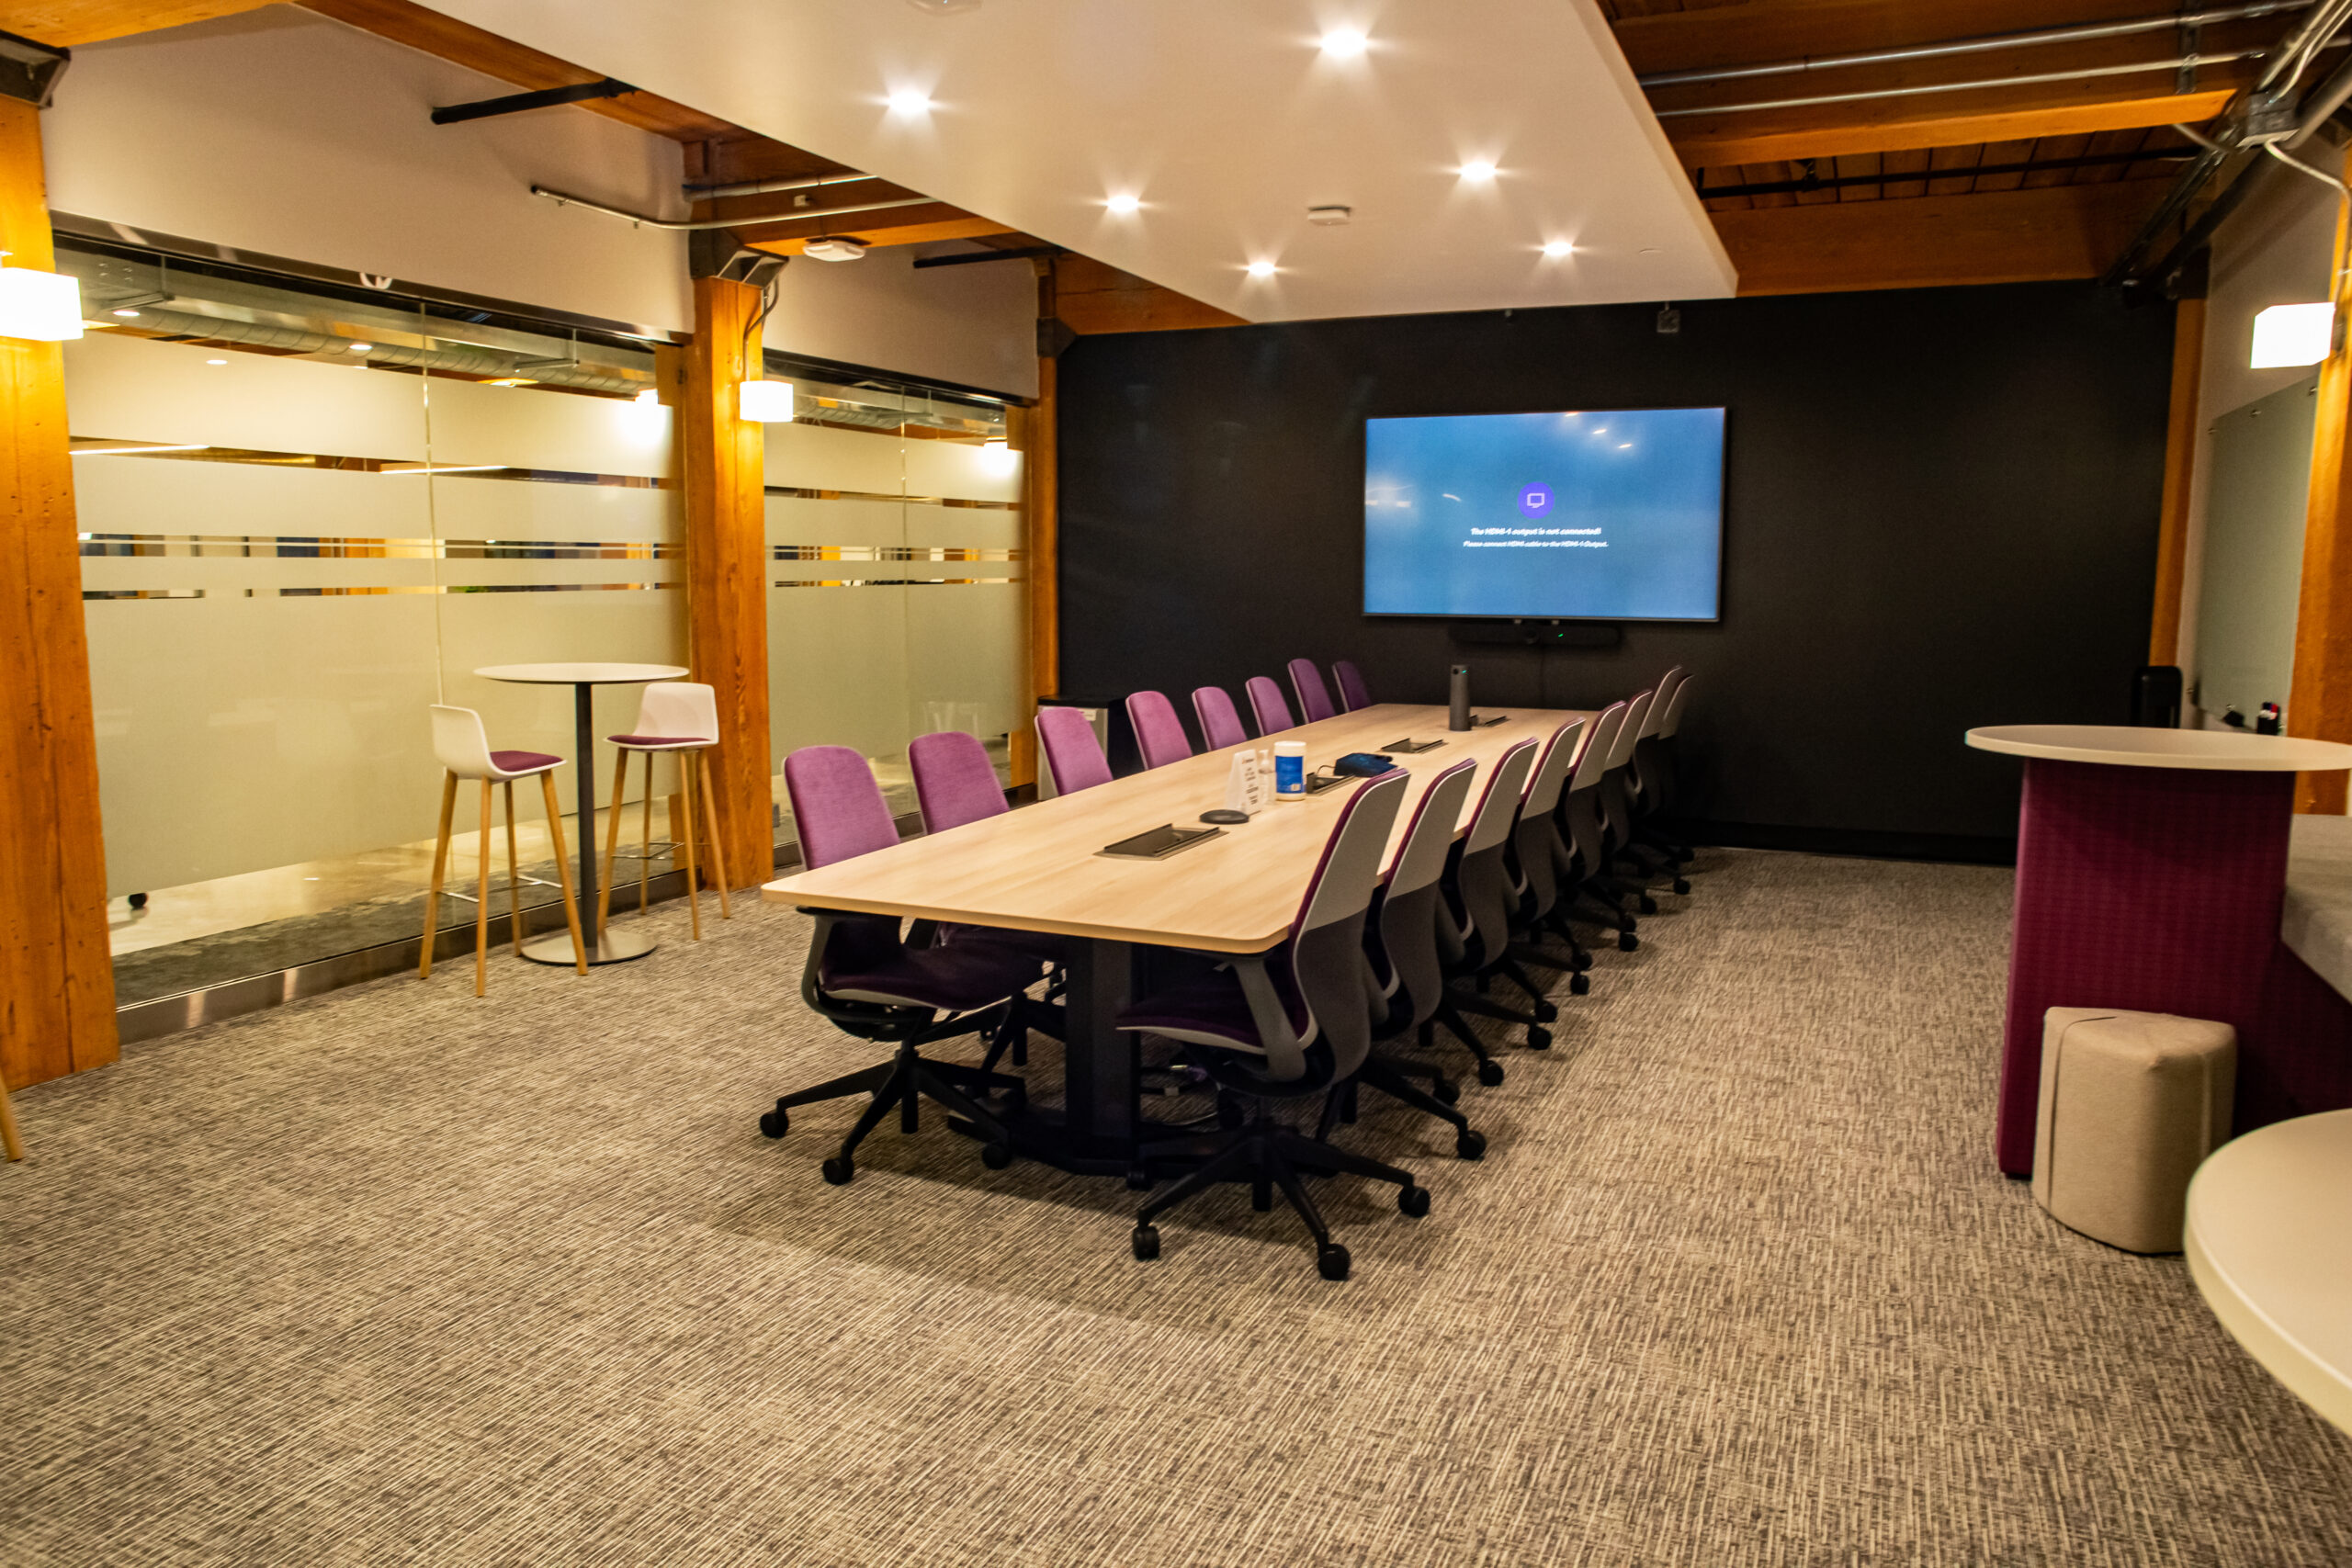 A meeting room in the Toronto Softchoice corporate office renovated by Titan General